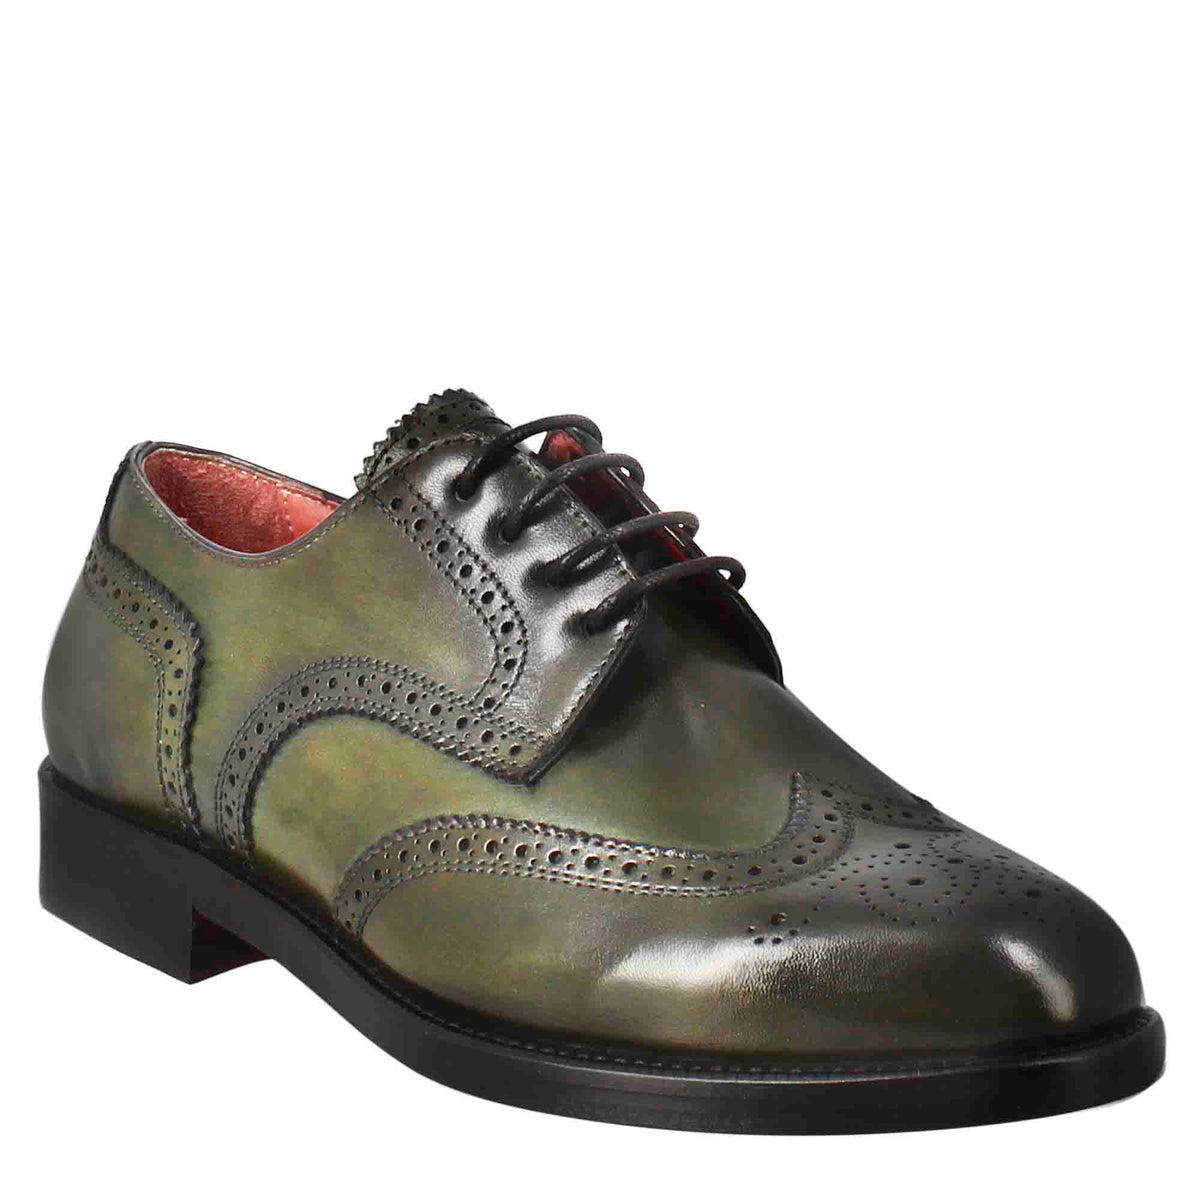 Women's derby with brogue effect in dark green leather